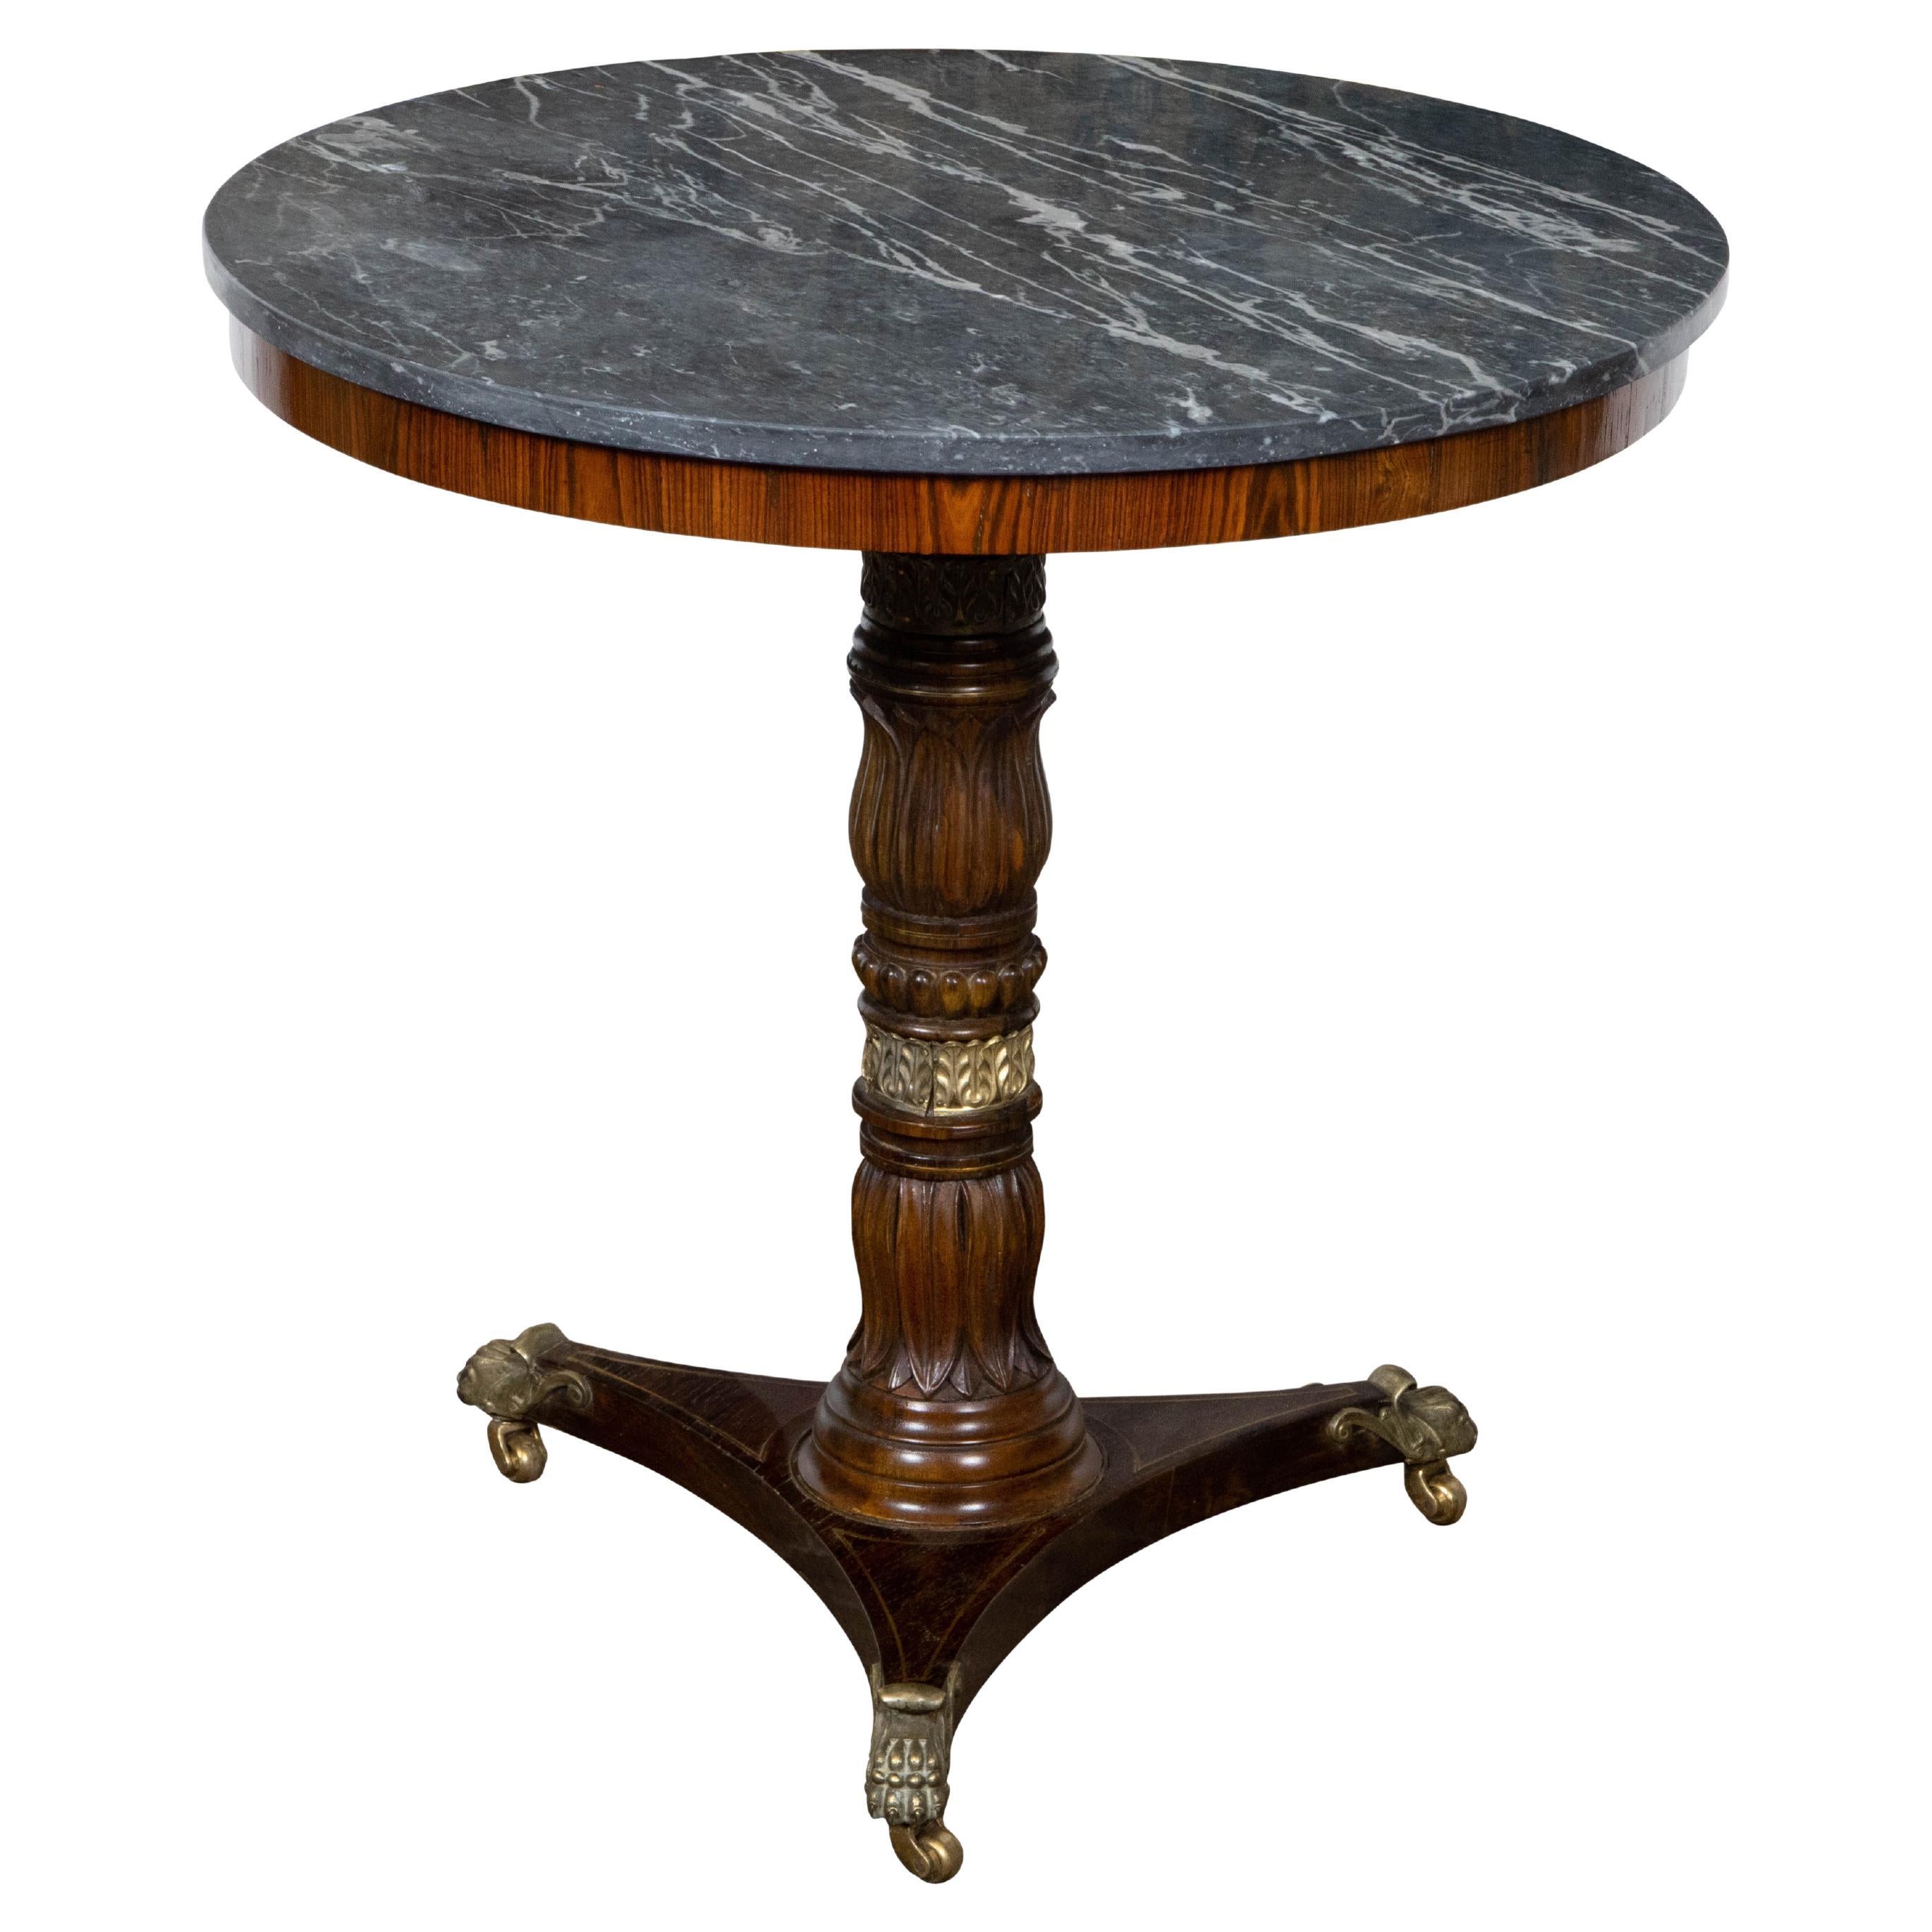 English Regency Period 19th Century Mahogany Side Table with Grey Marble Top